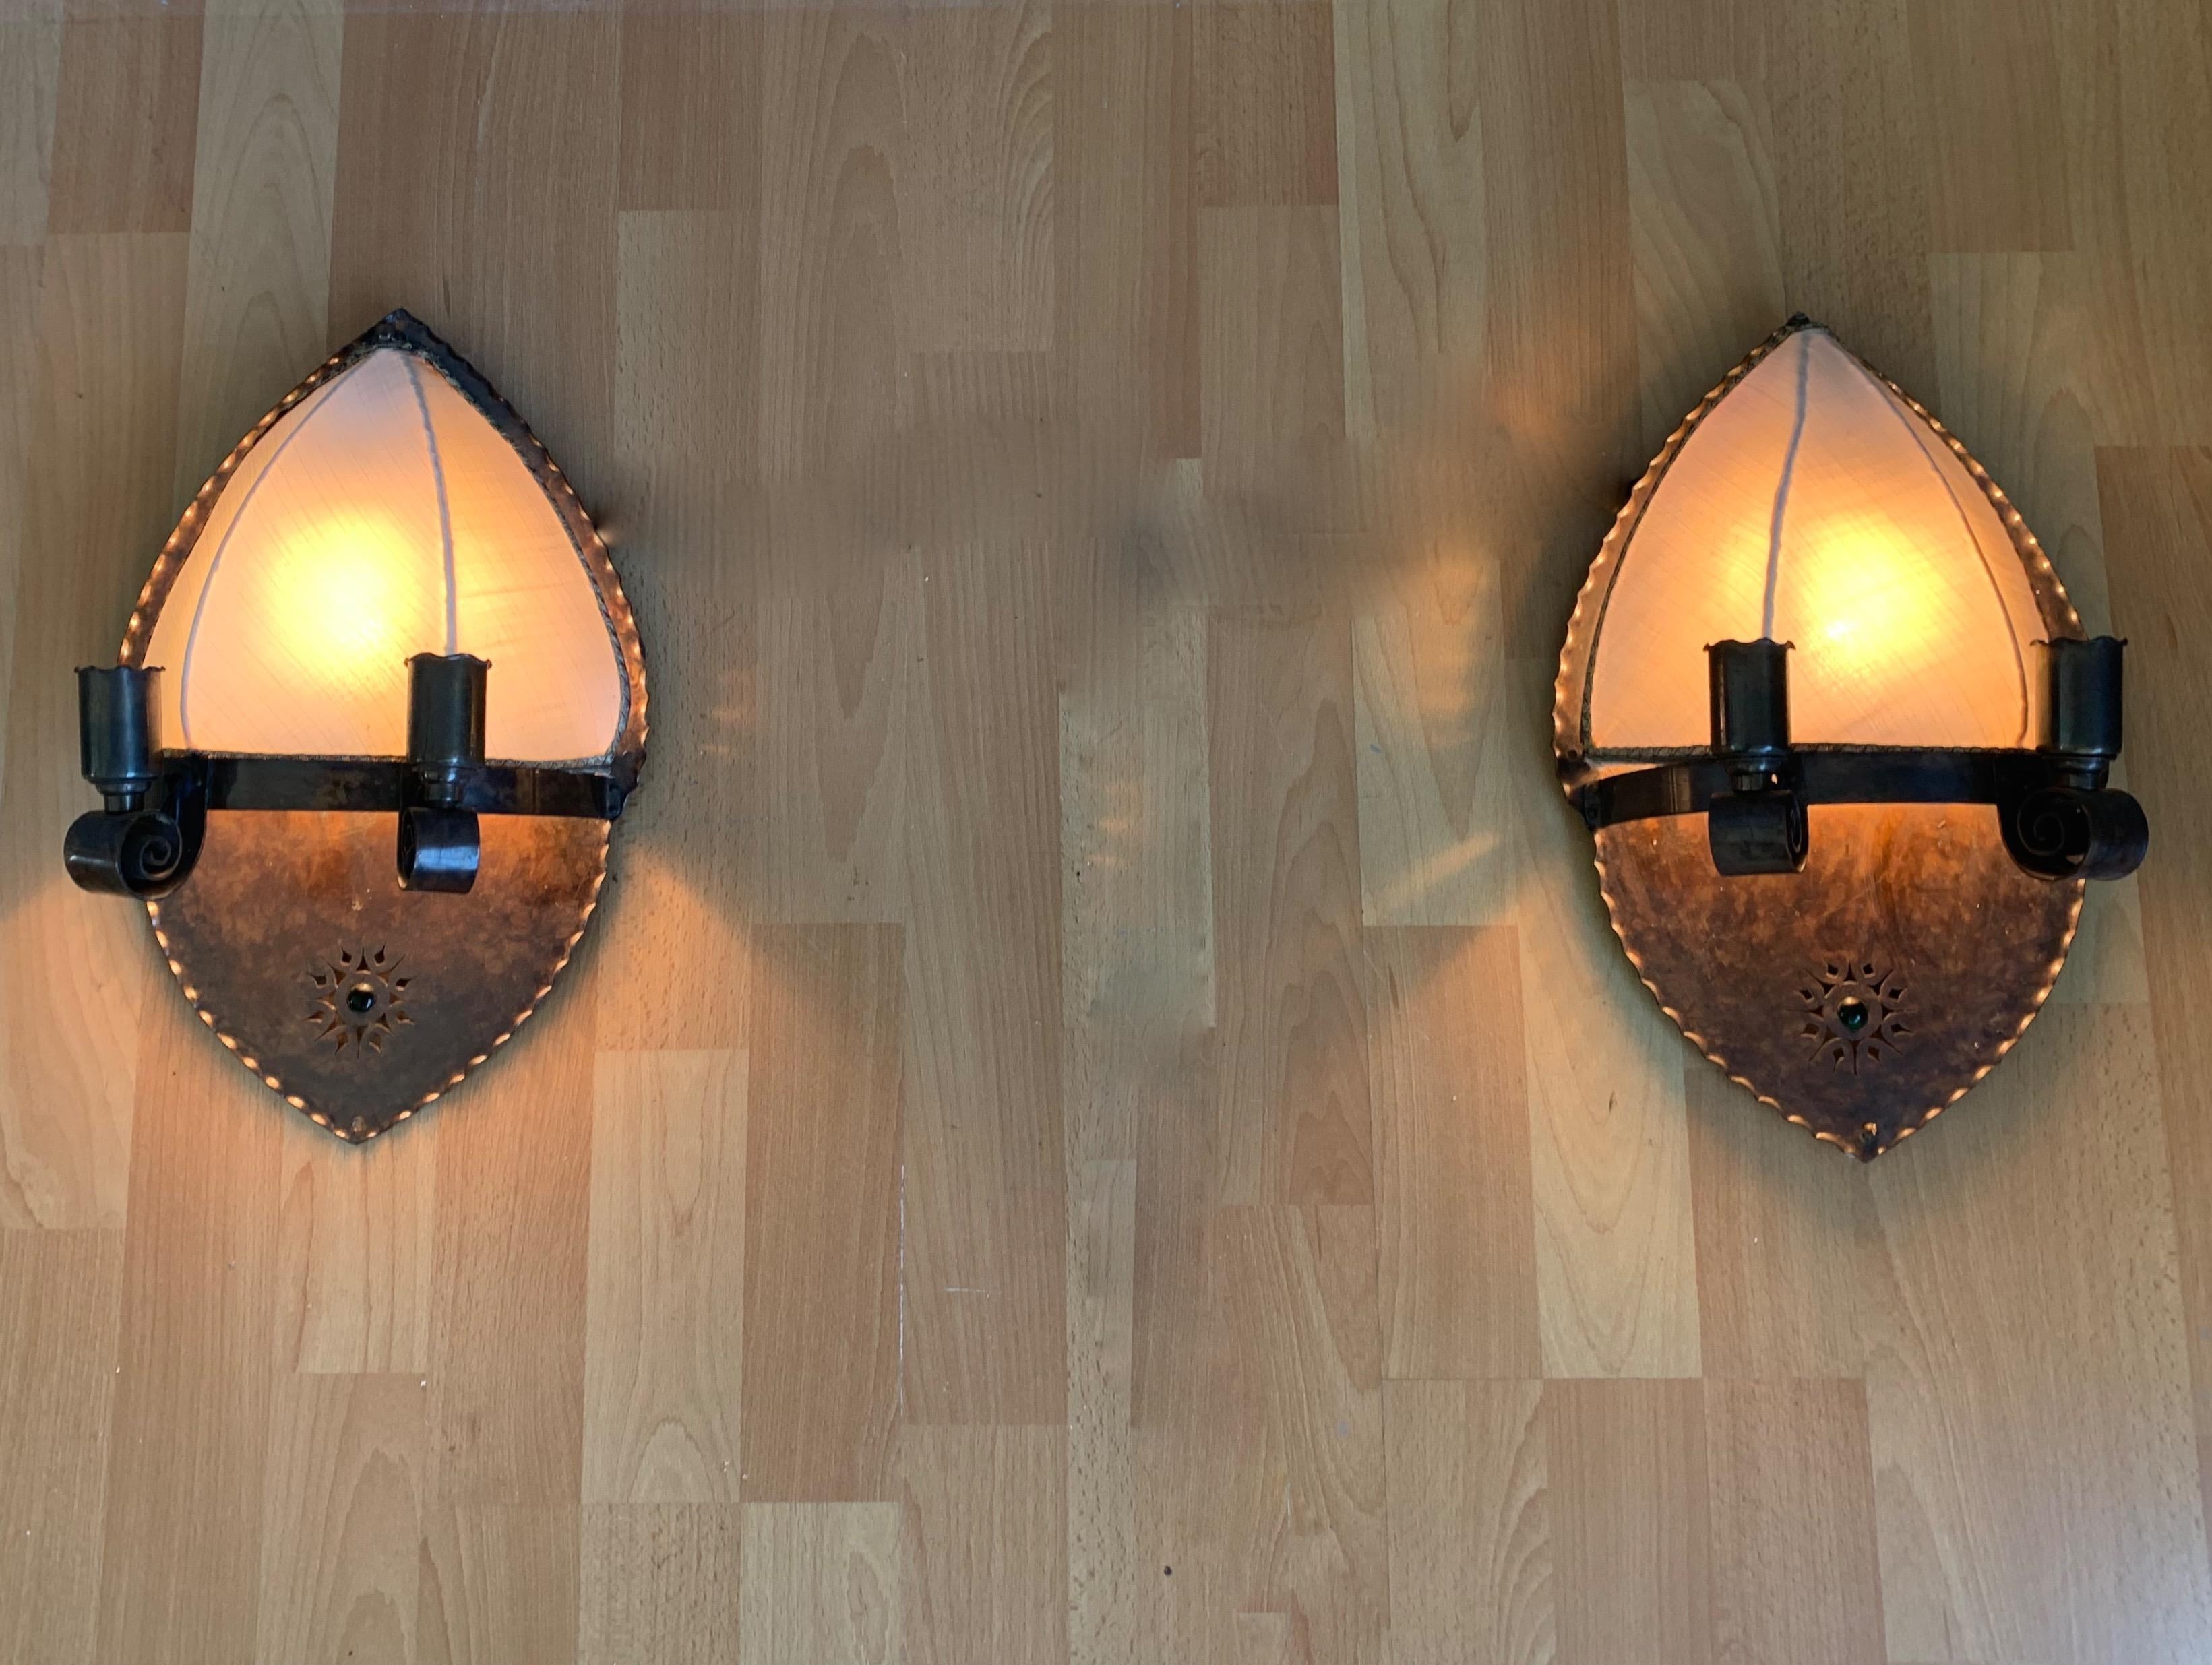 Rare pair of handcrafted antique wall sconces by one of Holland's finest.

If rare and highly attractive light fixtures is what you are looking for then these early 20th century sconces could take the space you have in mind for them to the next